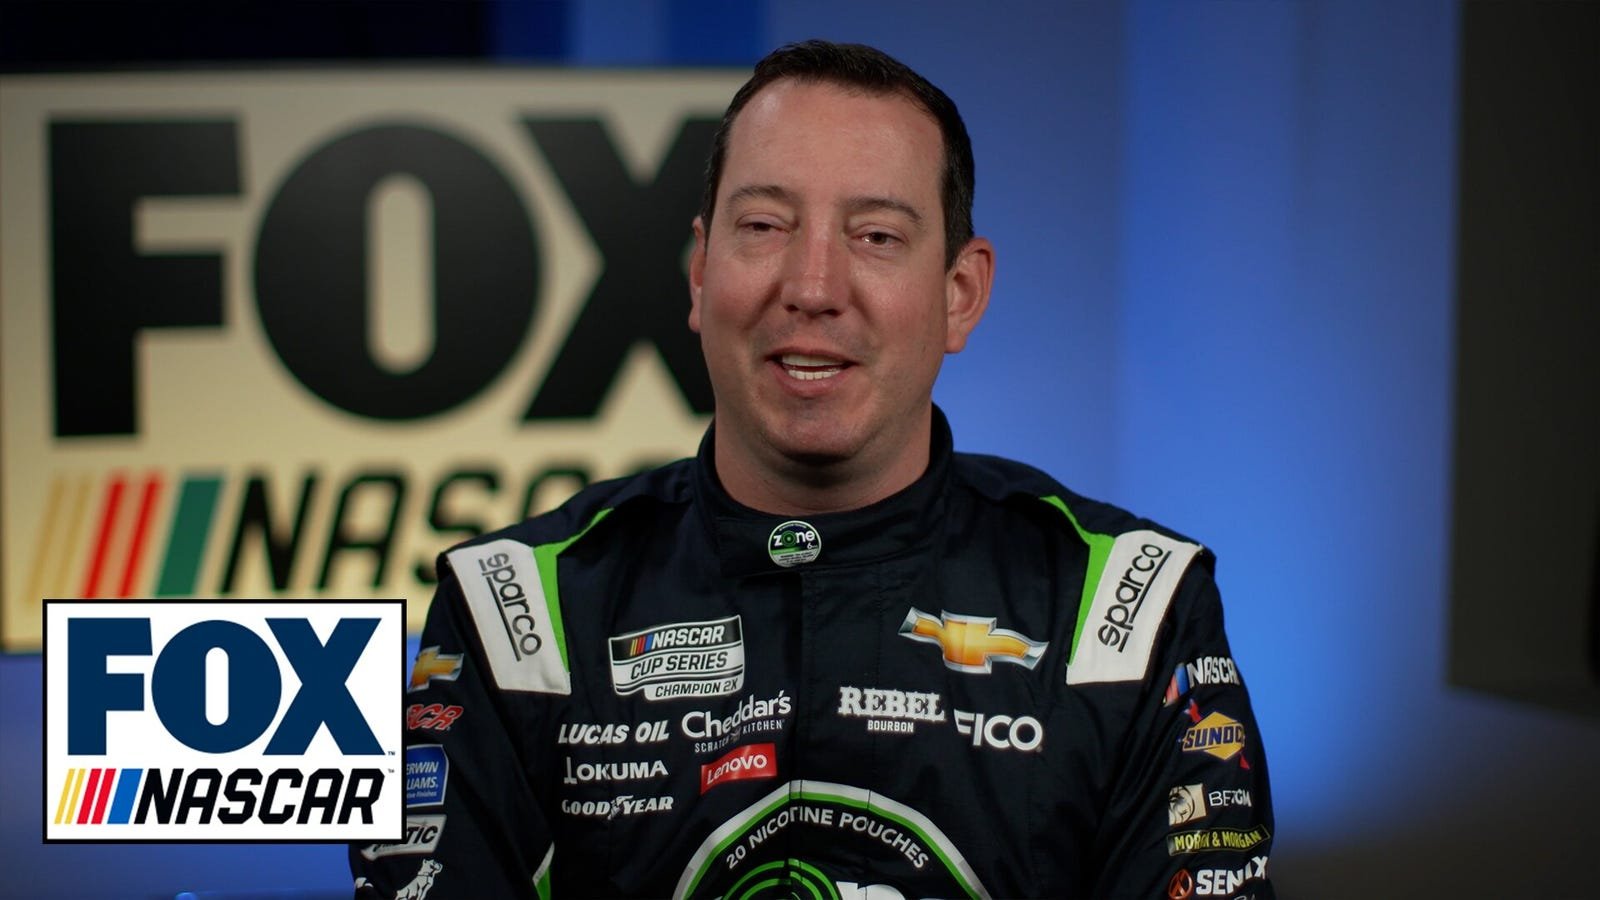 'I would love nothing more' – Kyle Busch on trying to win the upcoming Daytona 500